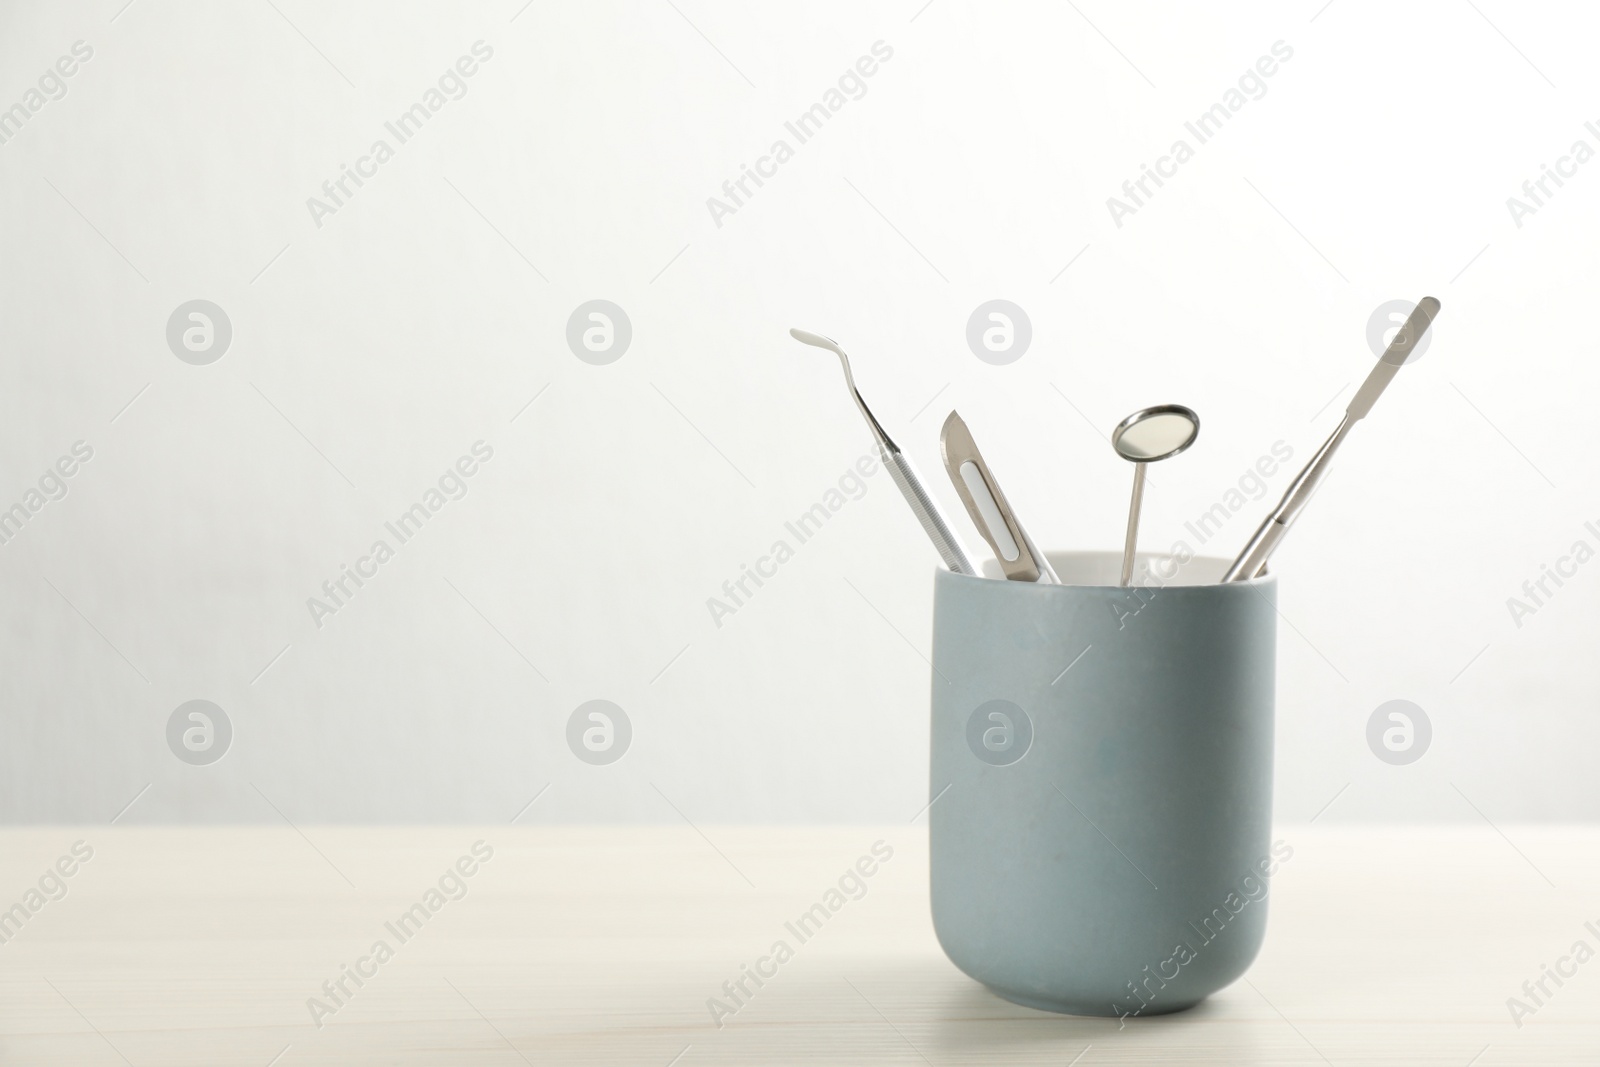 Photo of Holder with set of dentist's tools on wooden table. Space for text